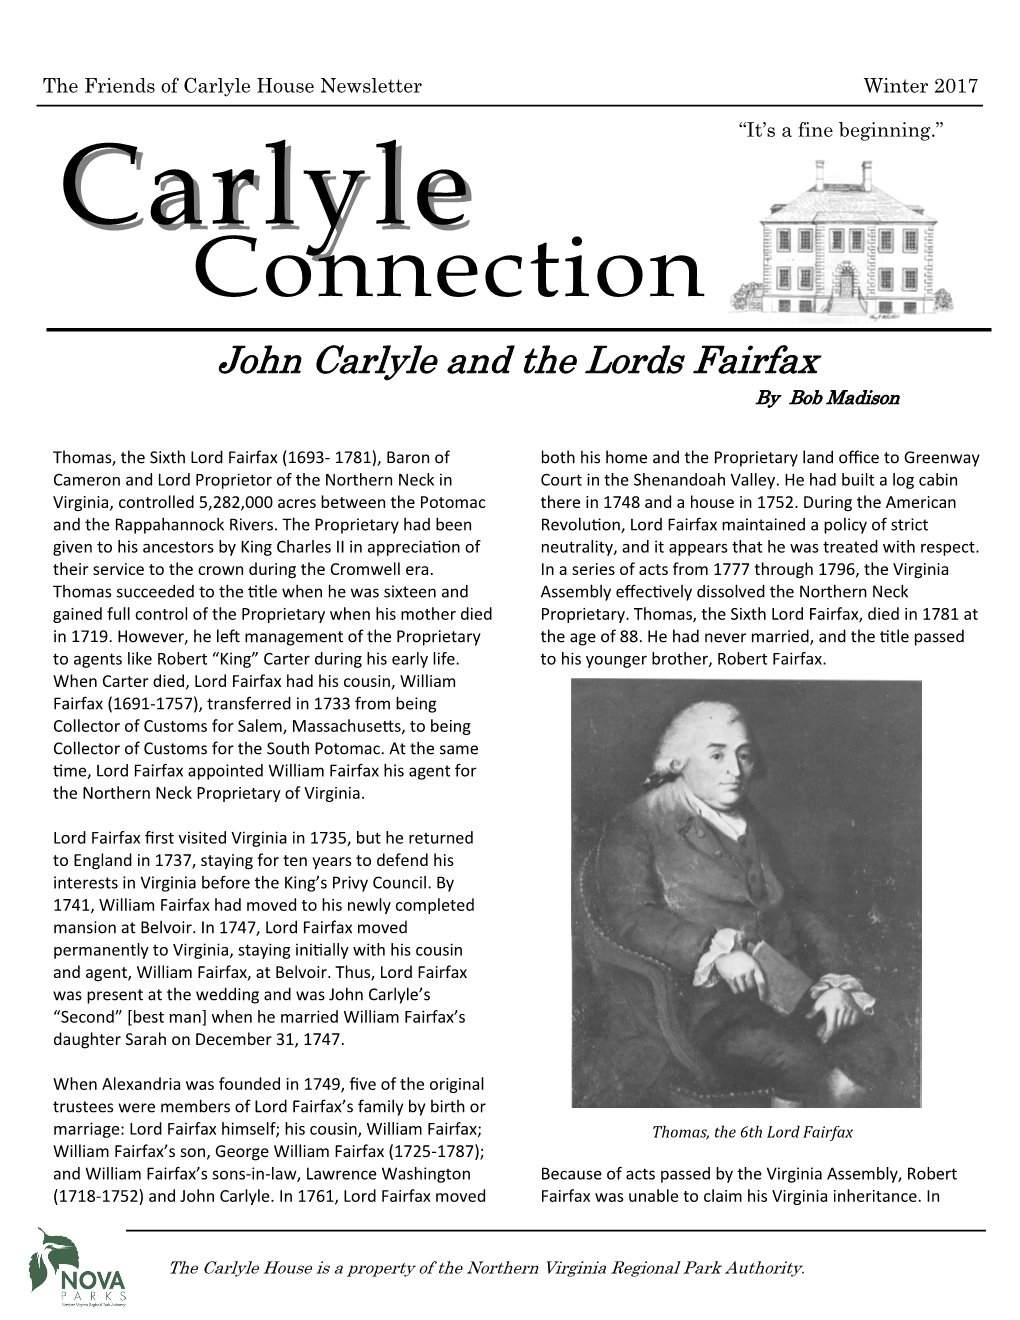 Carlyle Connection John Carlyle and the Lords Fairfax by Bob Madison